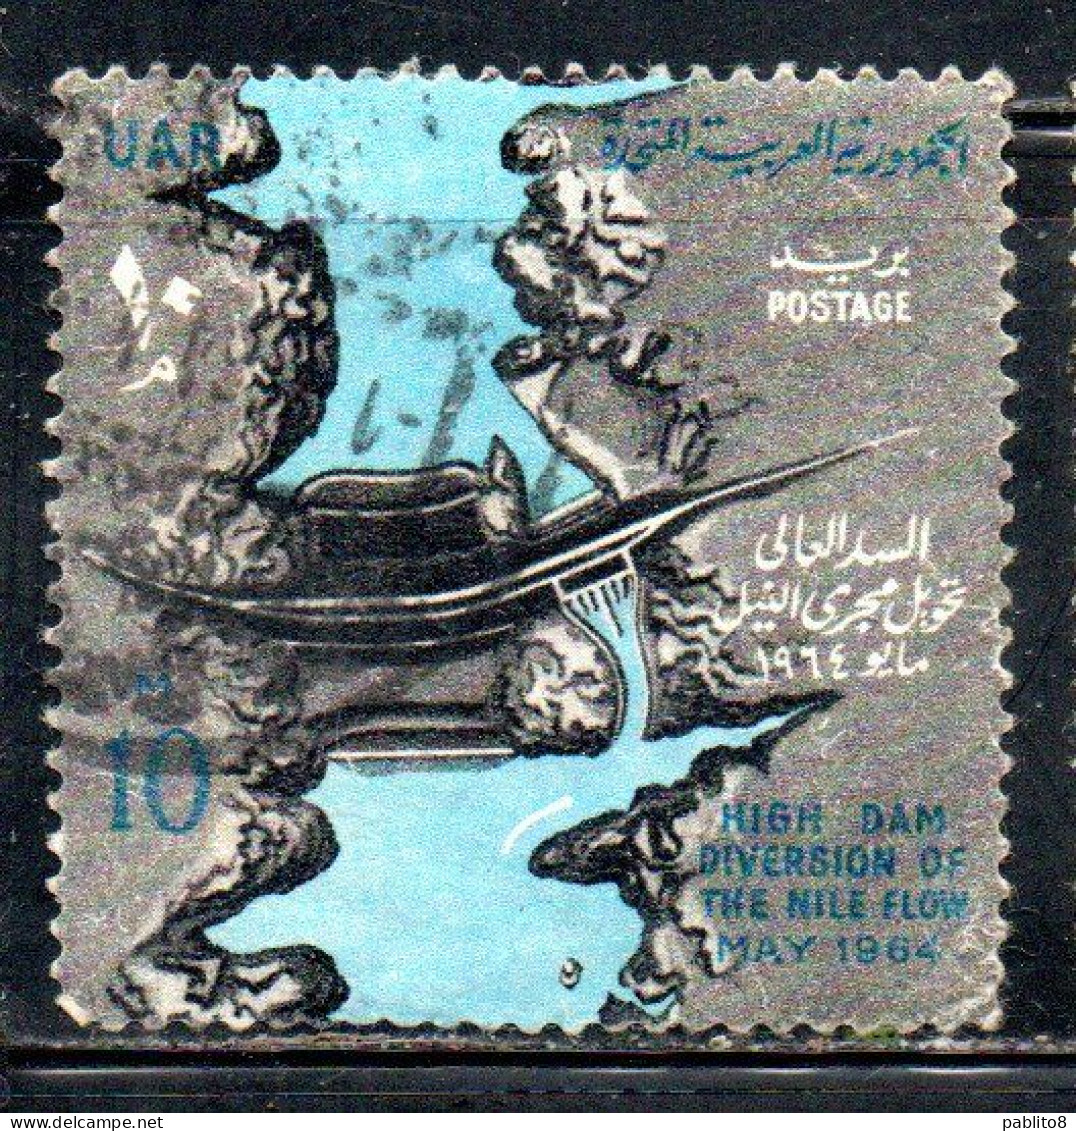 UAR EGYPT EGITTO 1964 THE DIVERSION OF THE NILE ASWAN HIGH DAM 10m USED USATO OBLITERE' - Used Stamps